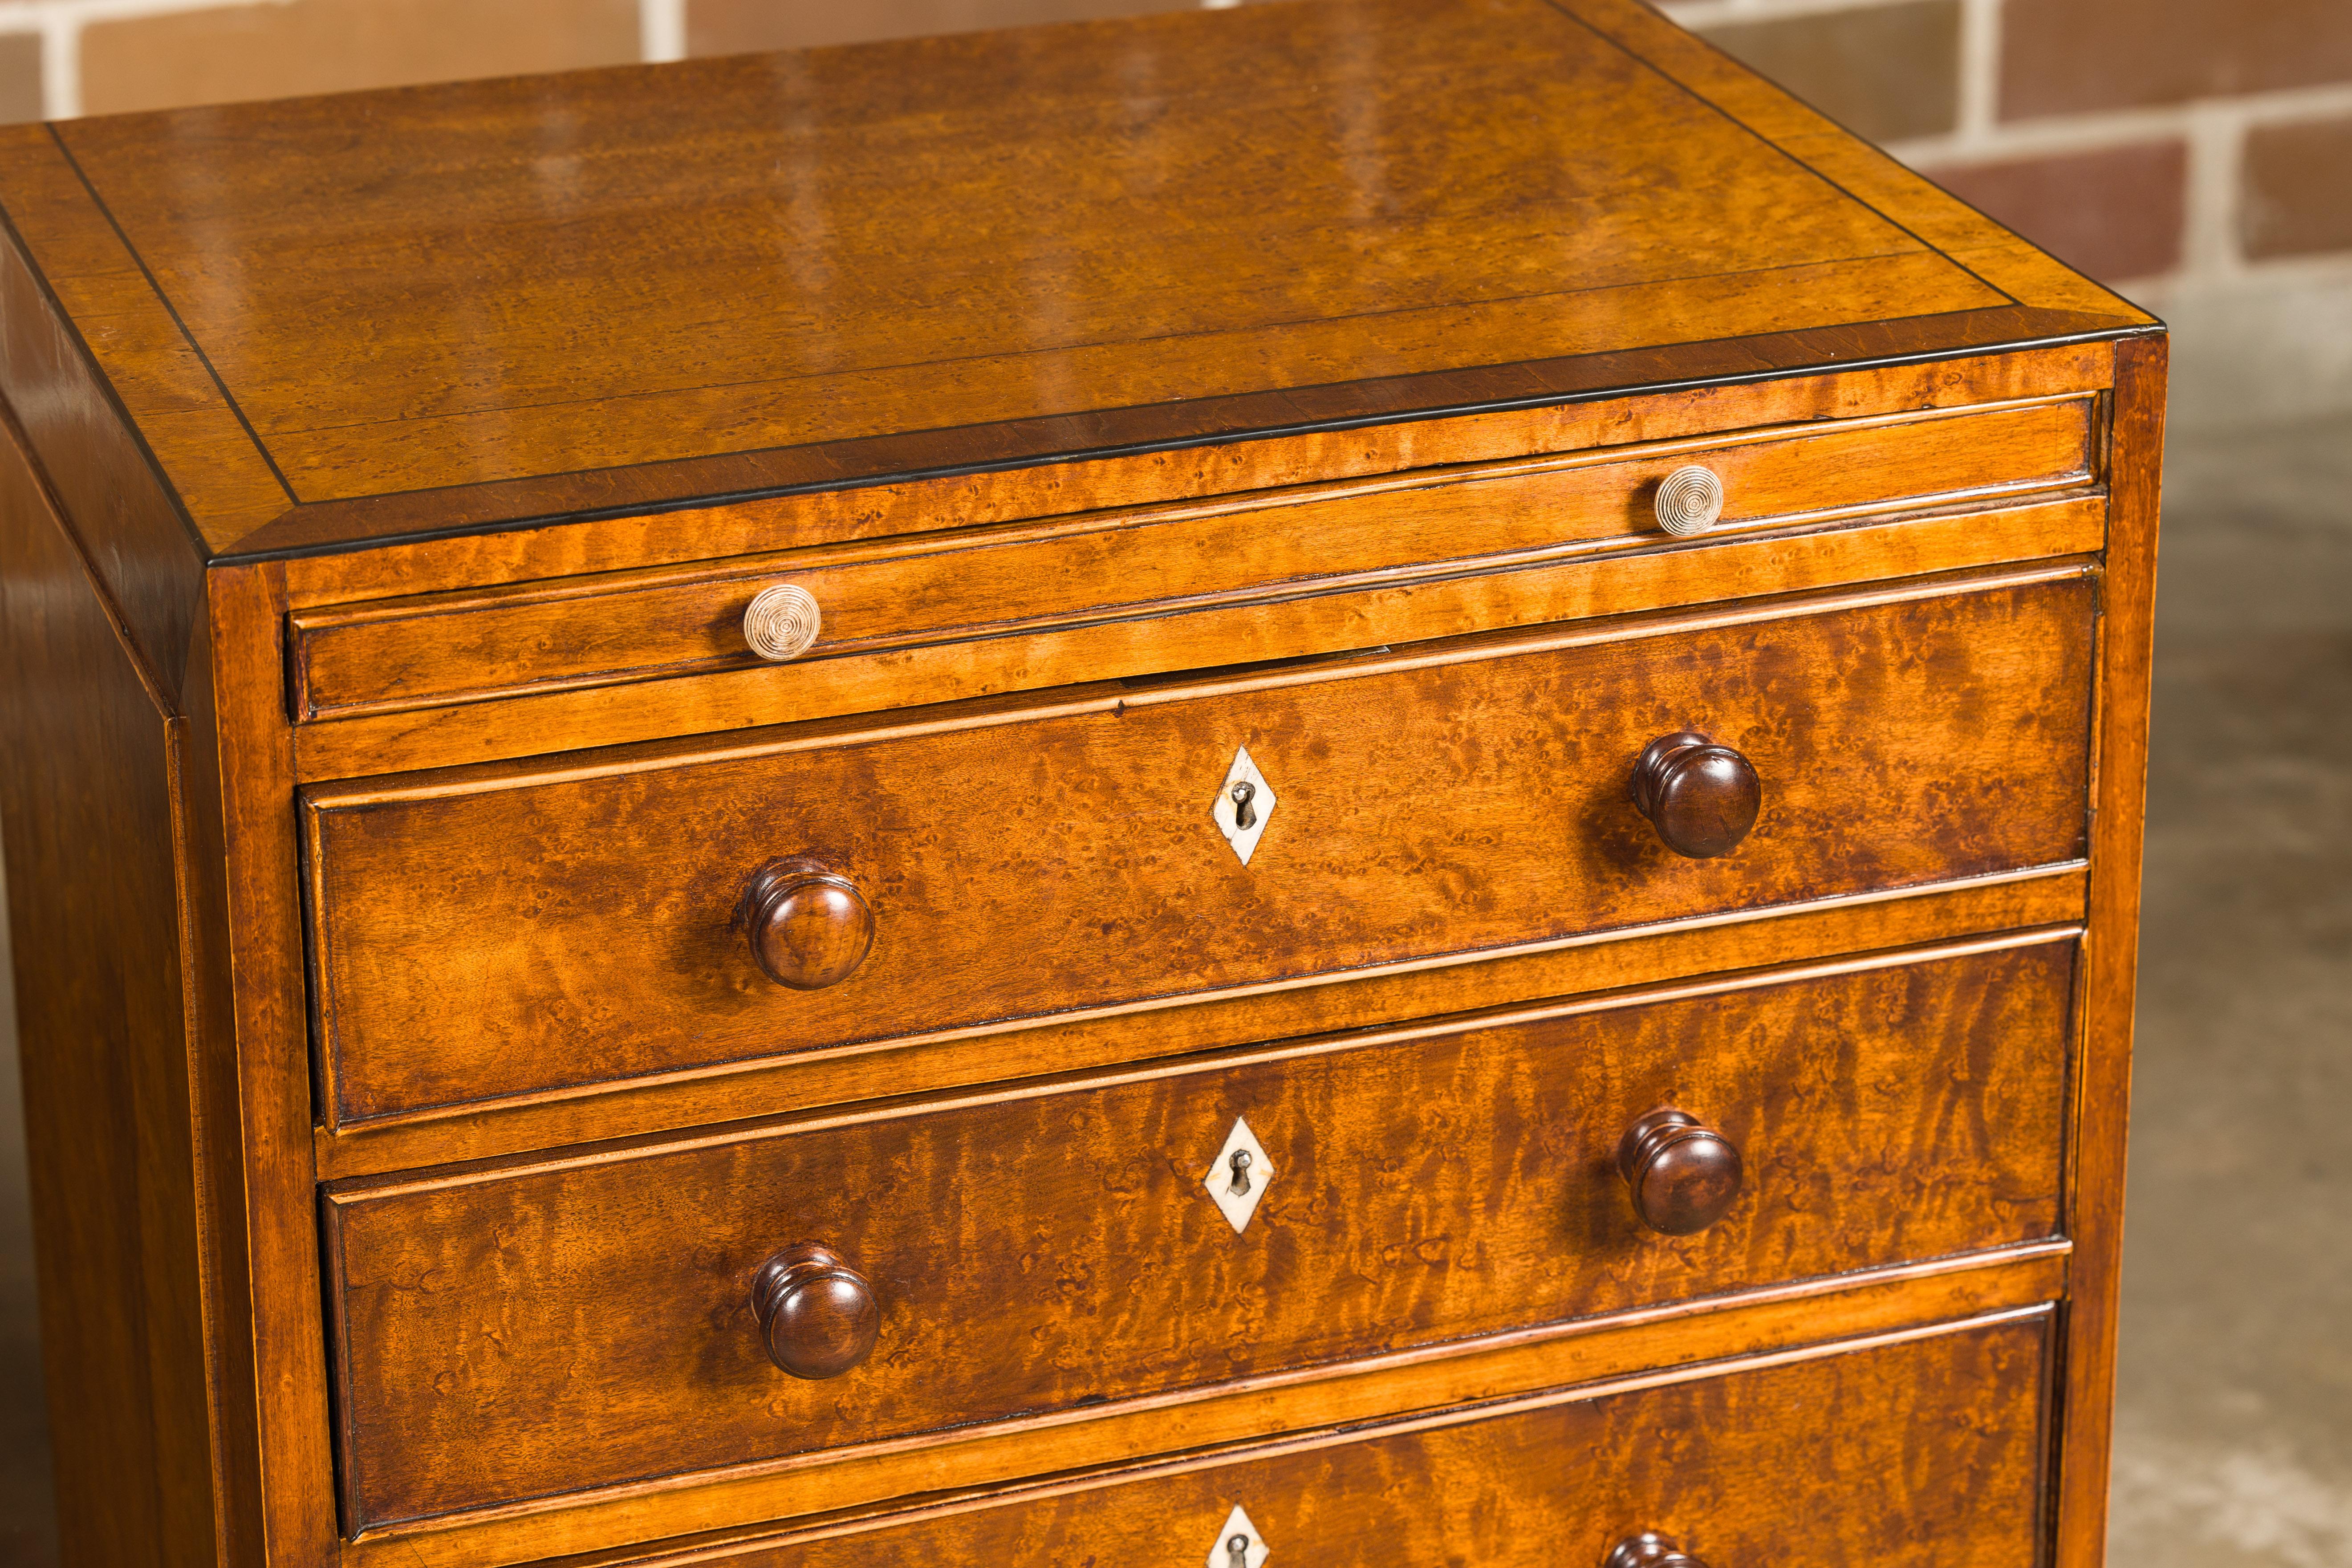 English Regency Period 1820s Bedside Chests with Graduating Drawers For Sale 9